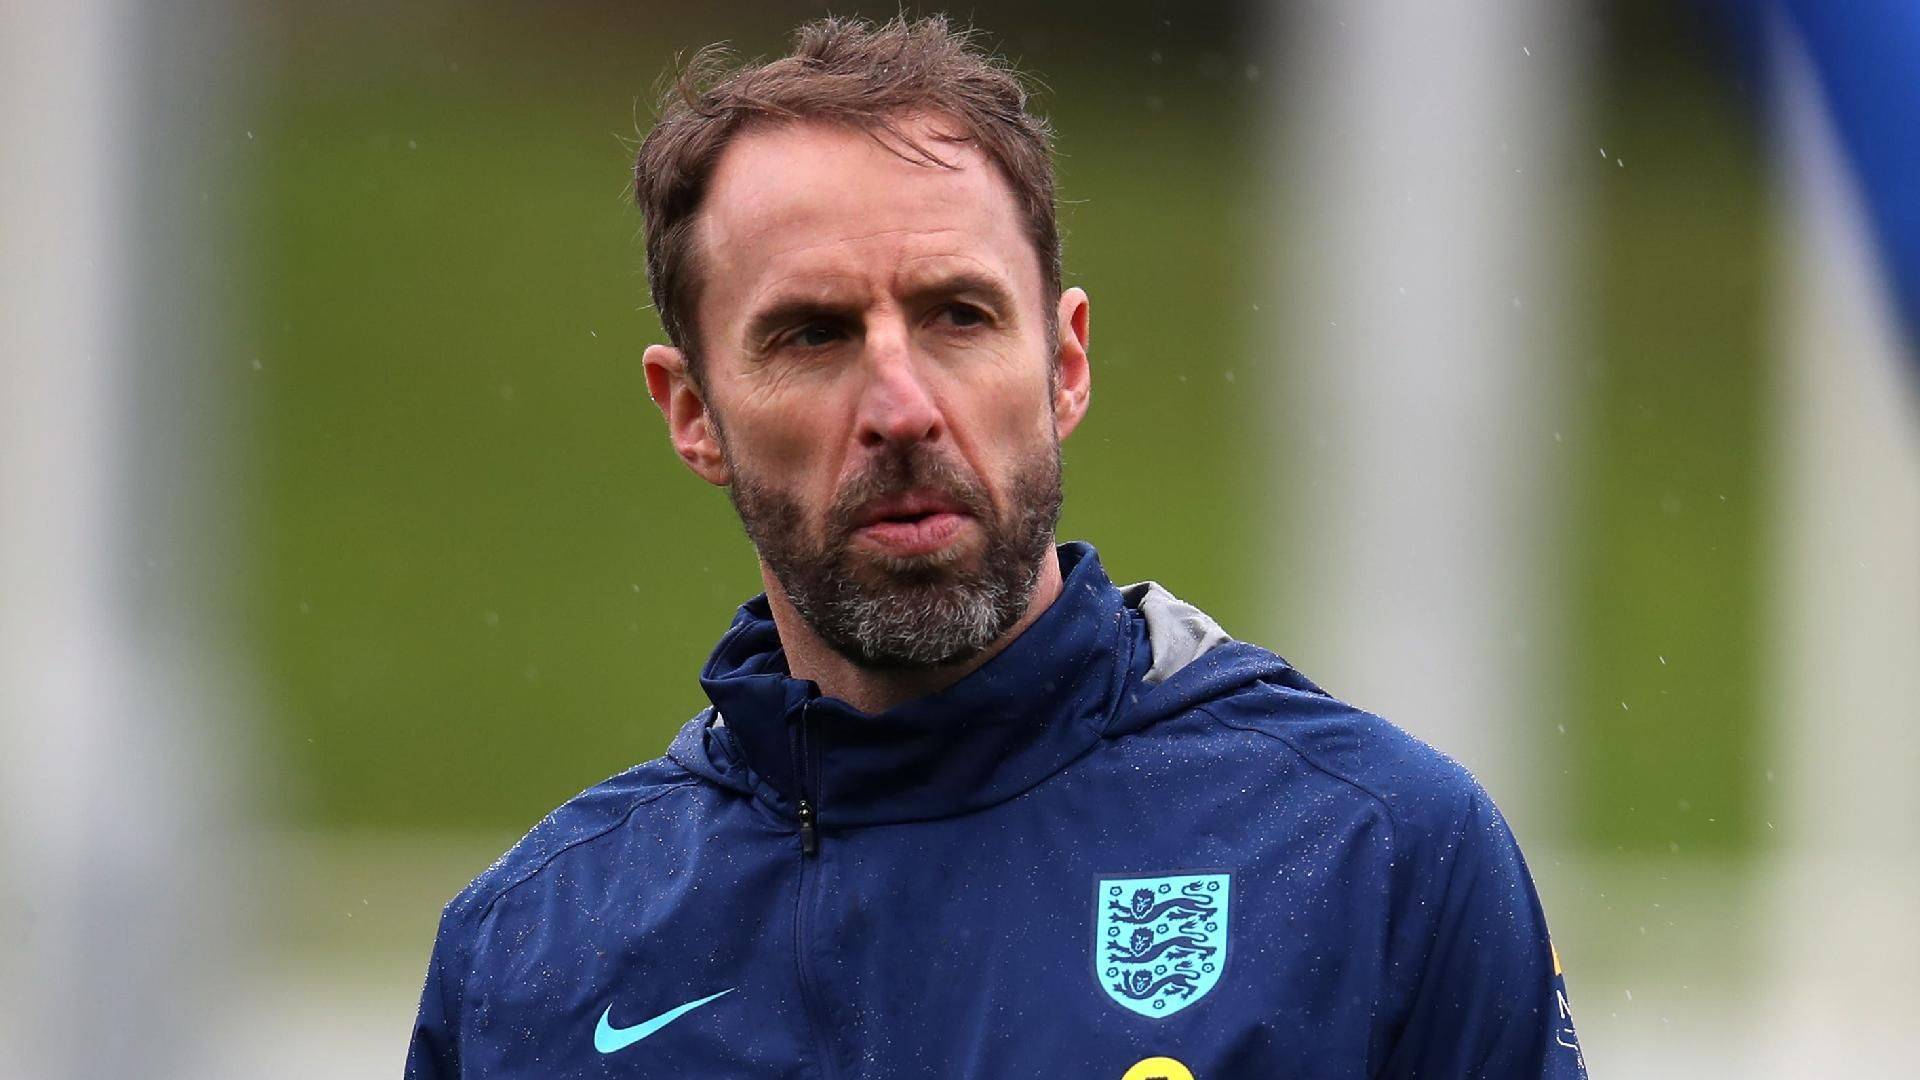 Southgate: A Strugglesome Game, But Adversity Benefits Us